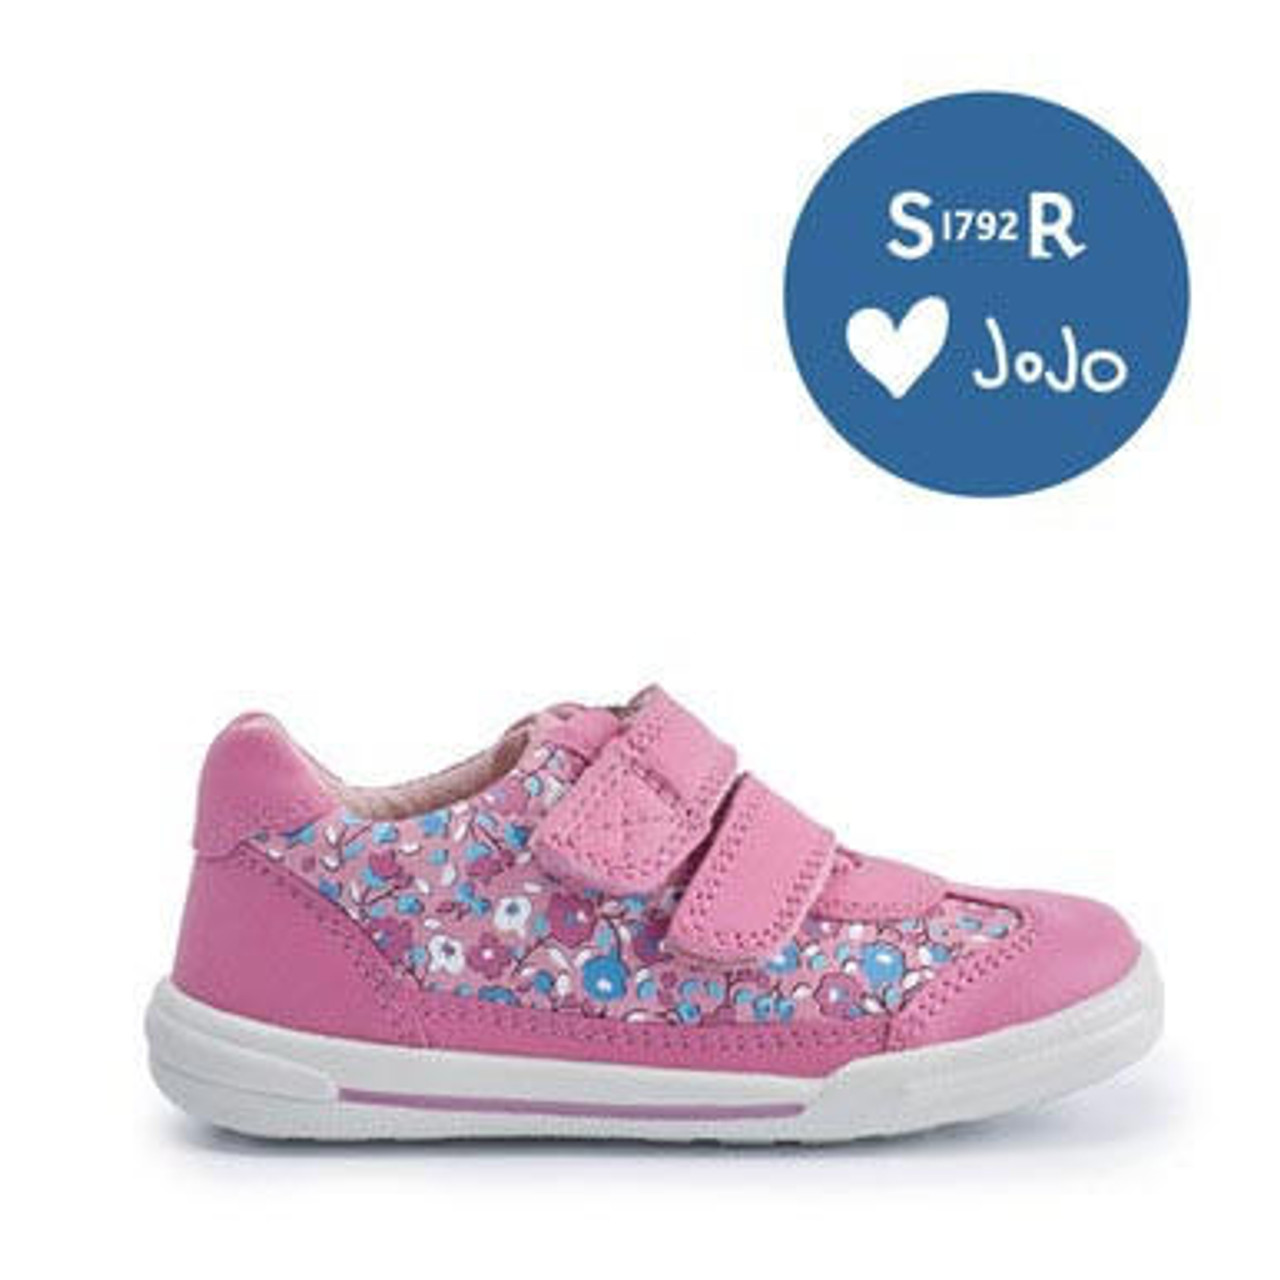 Baby Boy Girls Snakers Canvas Shoes Prewalkers First-Walk Shoes 